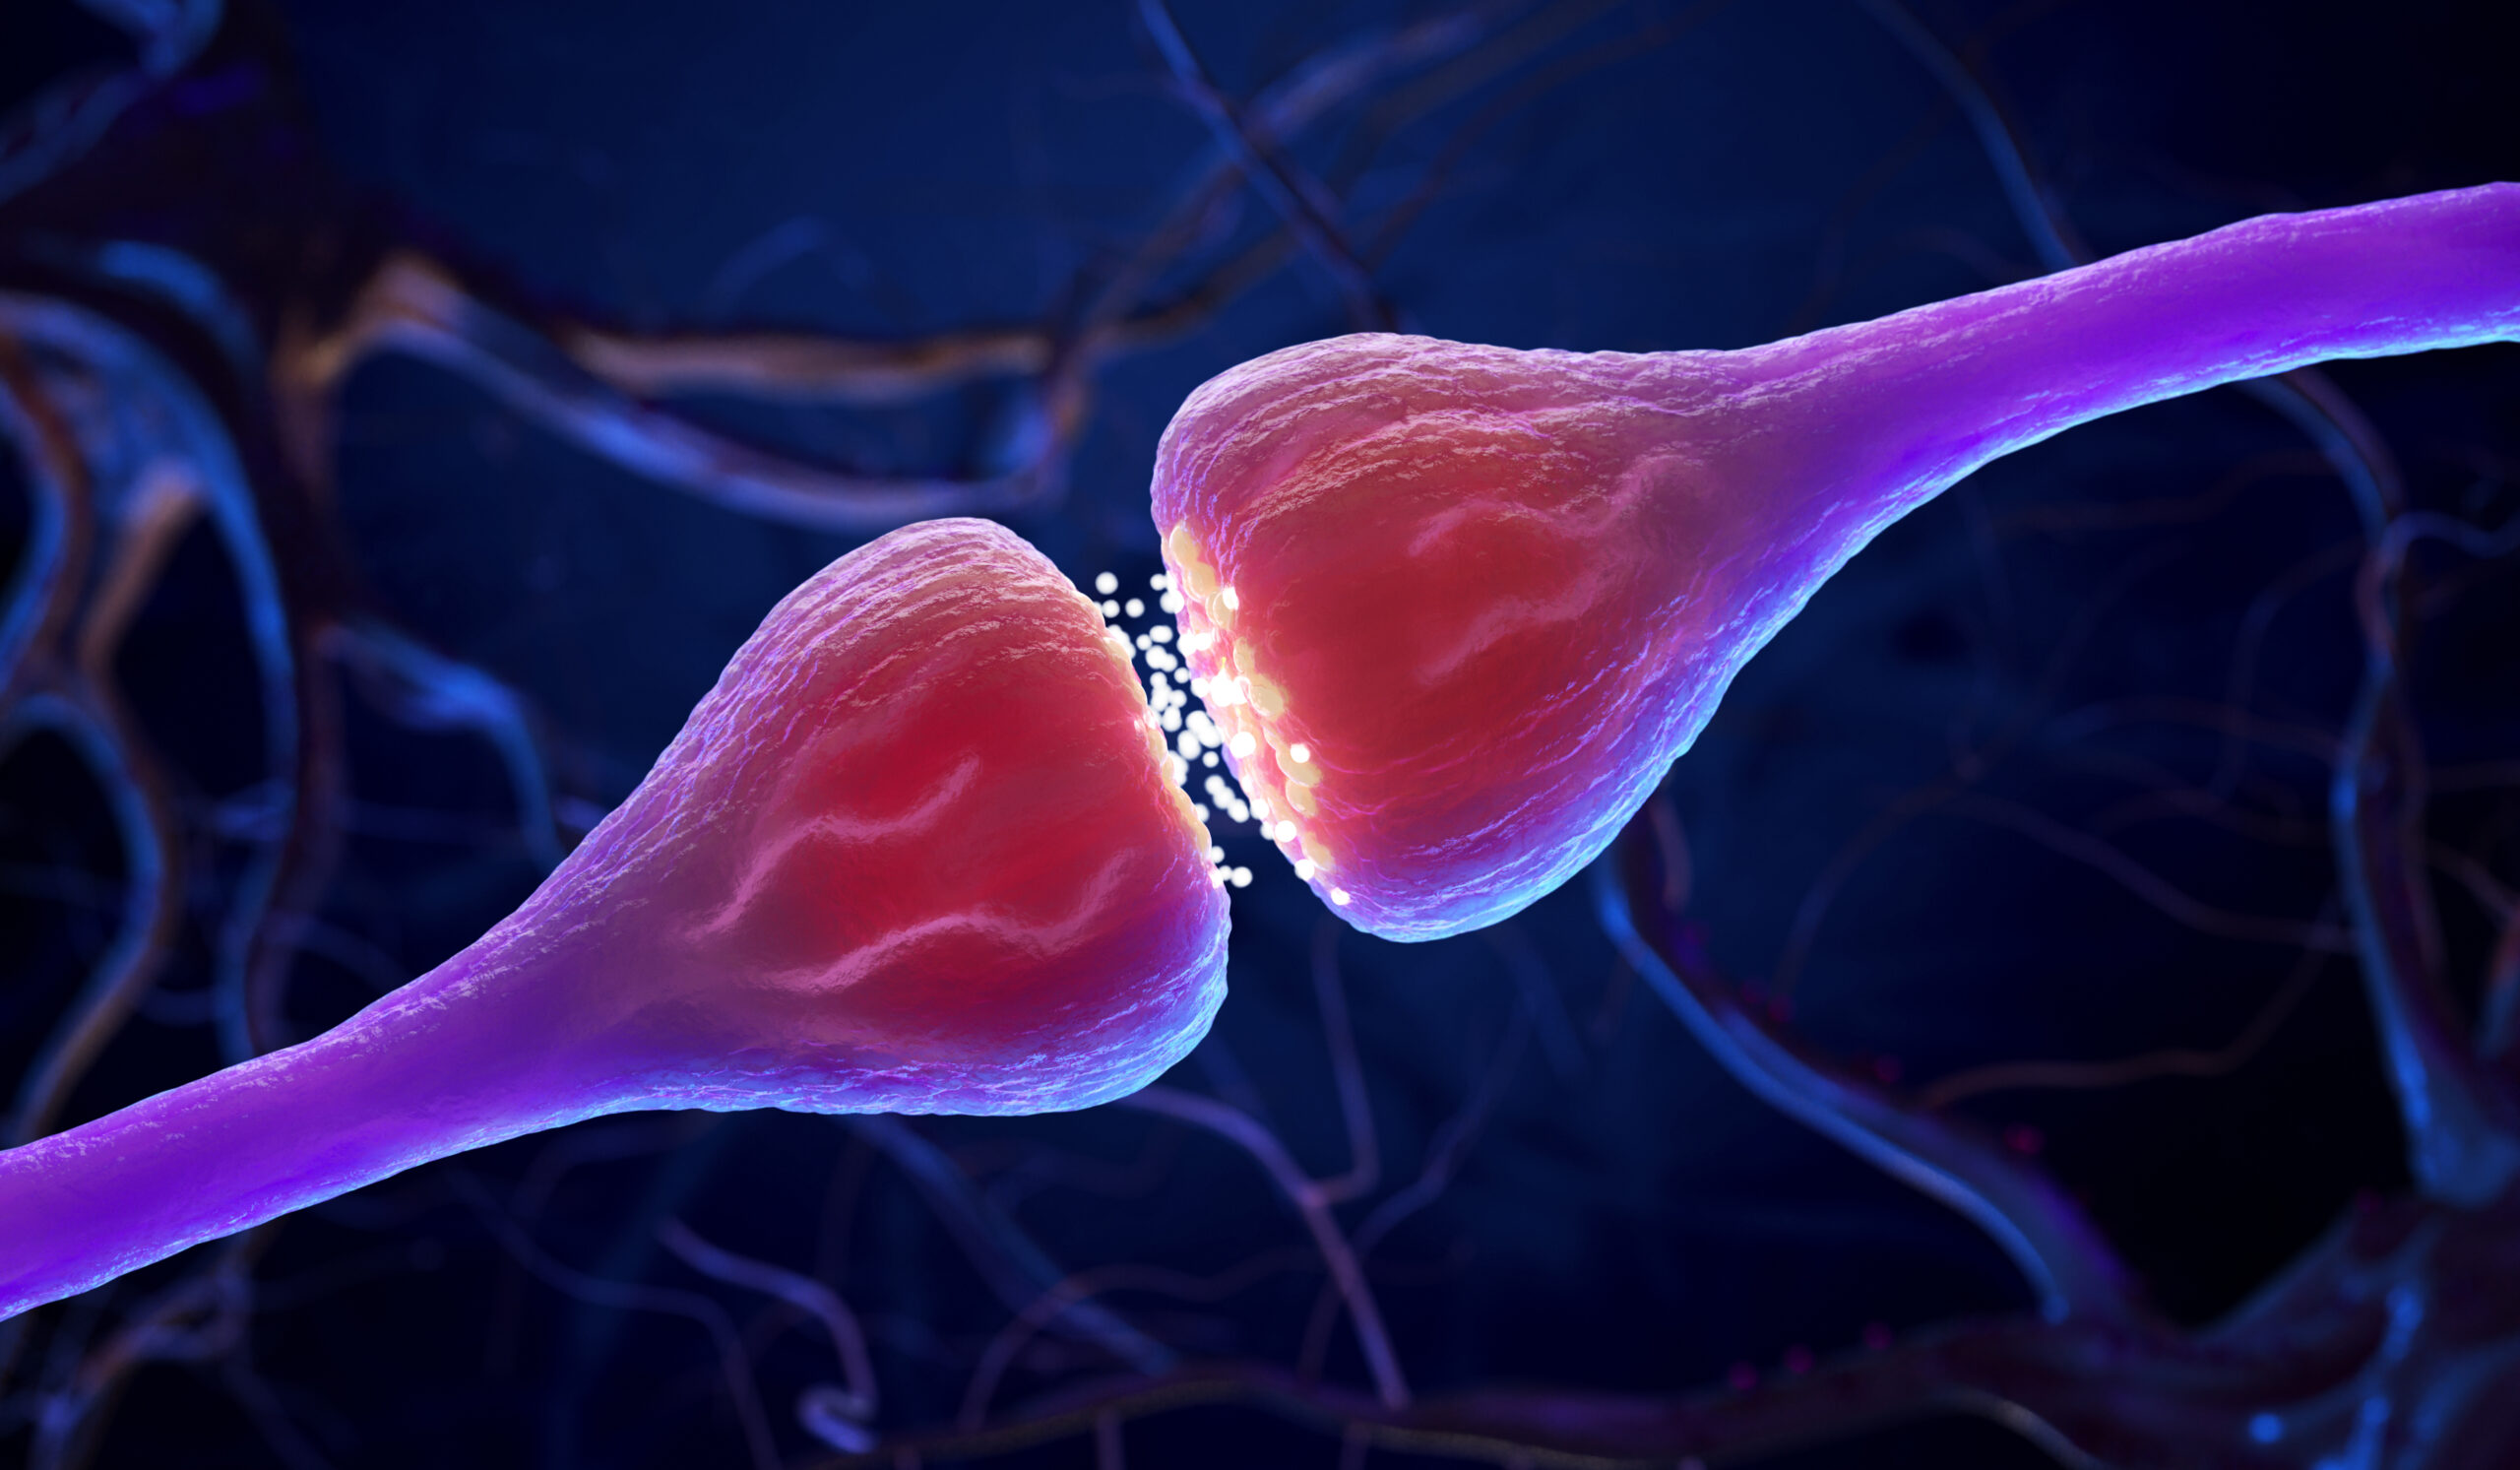 3D illustration of a synapse and Neuron cells sending electrical chemical signals.